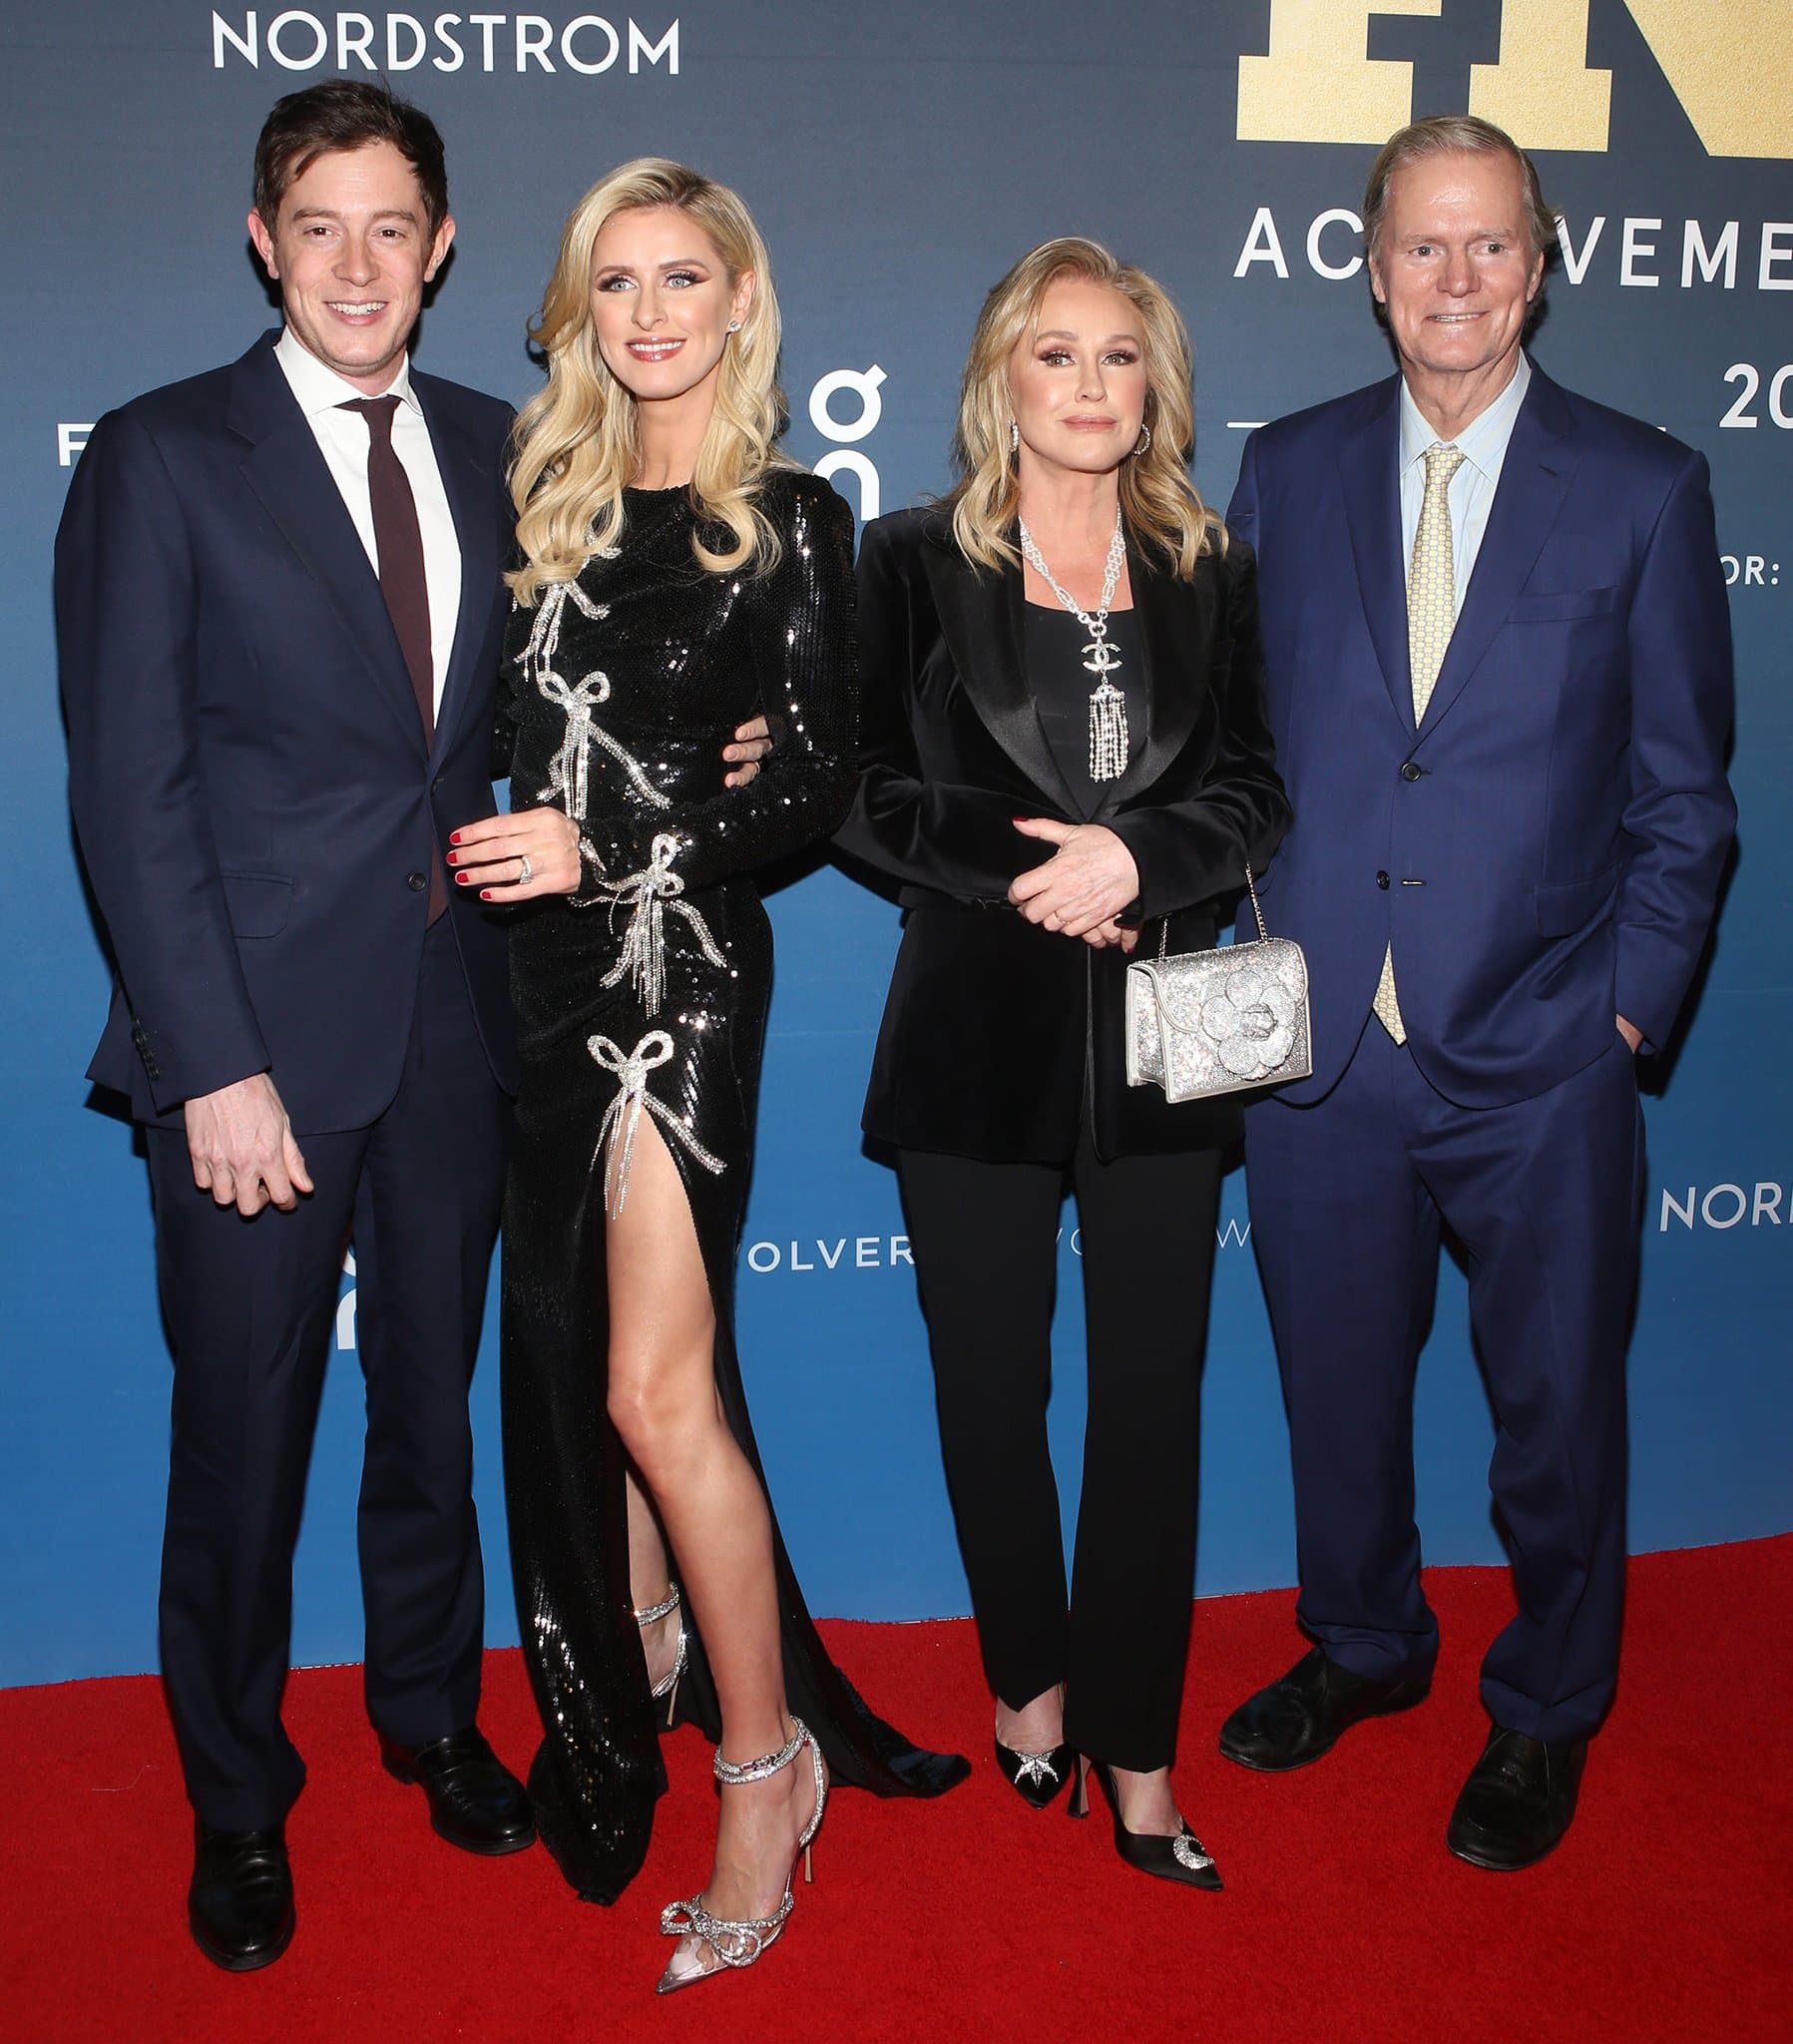 James Rothschild, Nicky Hilton, Kathy Hilton, and Richard Hilton at the 35th Annual FN Achievement Awards held at Cipriani South Street in New York City on November 30, 2021